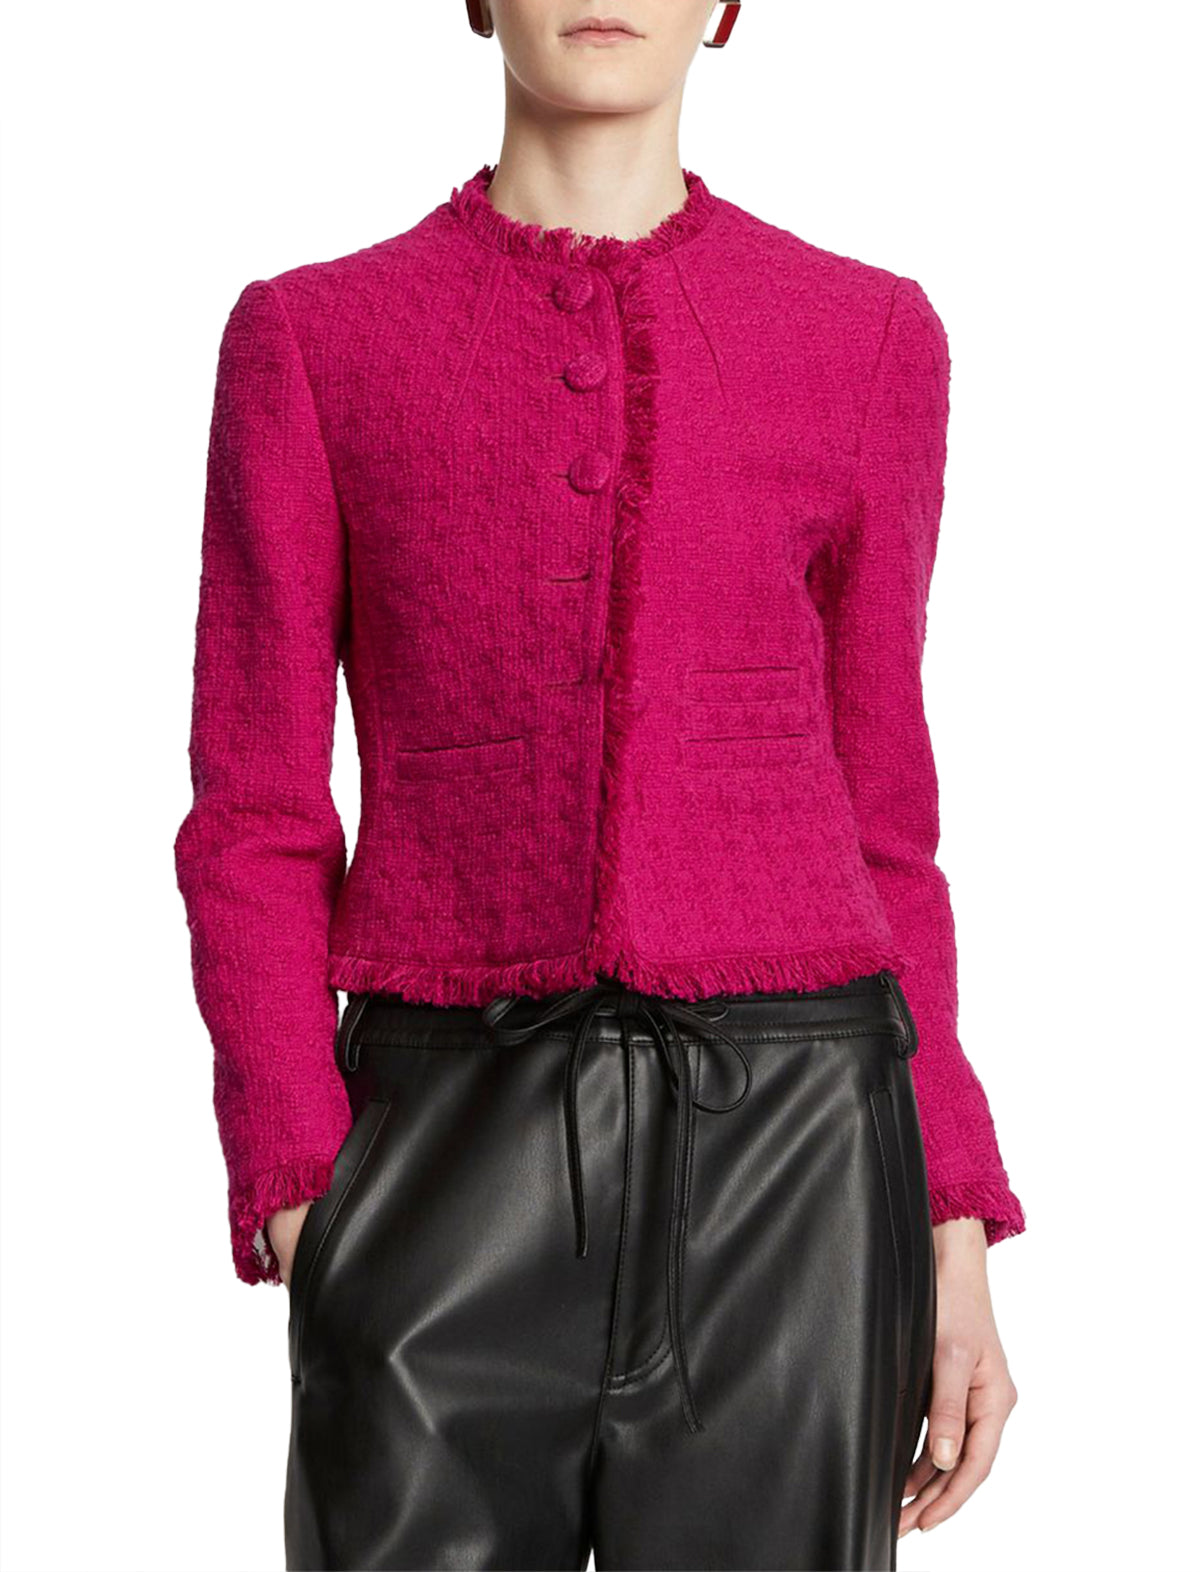 PROENZA SCHOULER WHITE LABEL Cropped Tweed Jacket in Pink